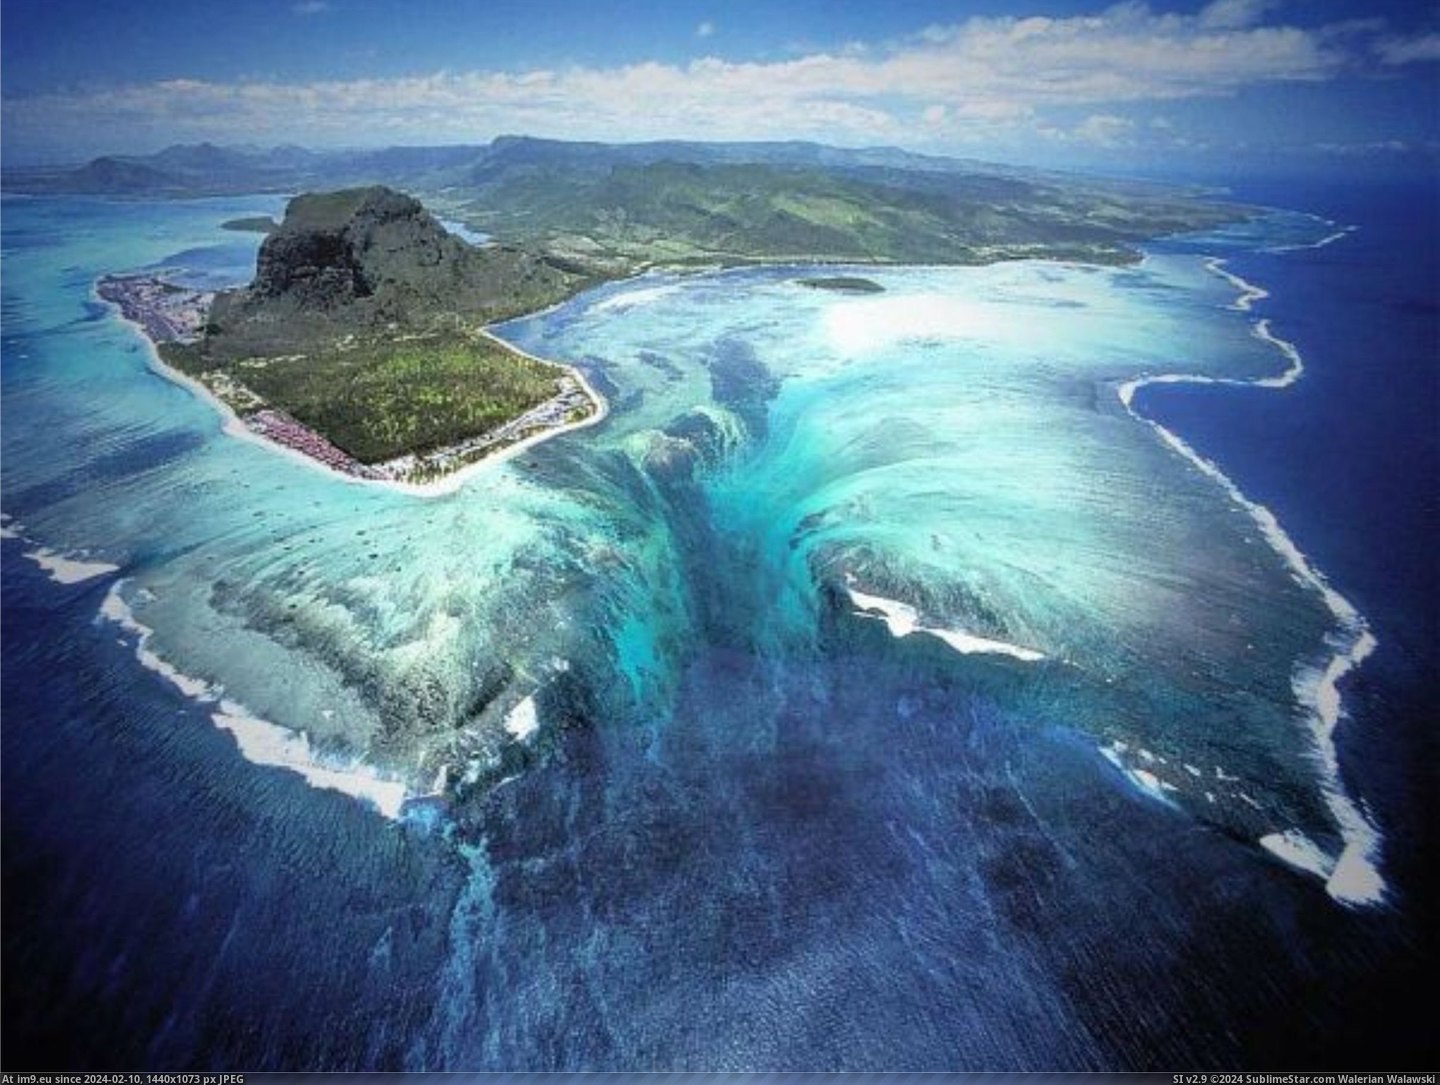 #Wallpapers #Island #Michael #Mauritius #Friedel #Underwater #Enormous #Plateau [Earthporn] Enormous underwater plateau - Island of Mauritius - by Michael Friedel [2420x1815] Pic. (Изображение из альбом My r/EARTHPORN favs))